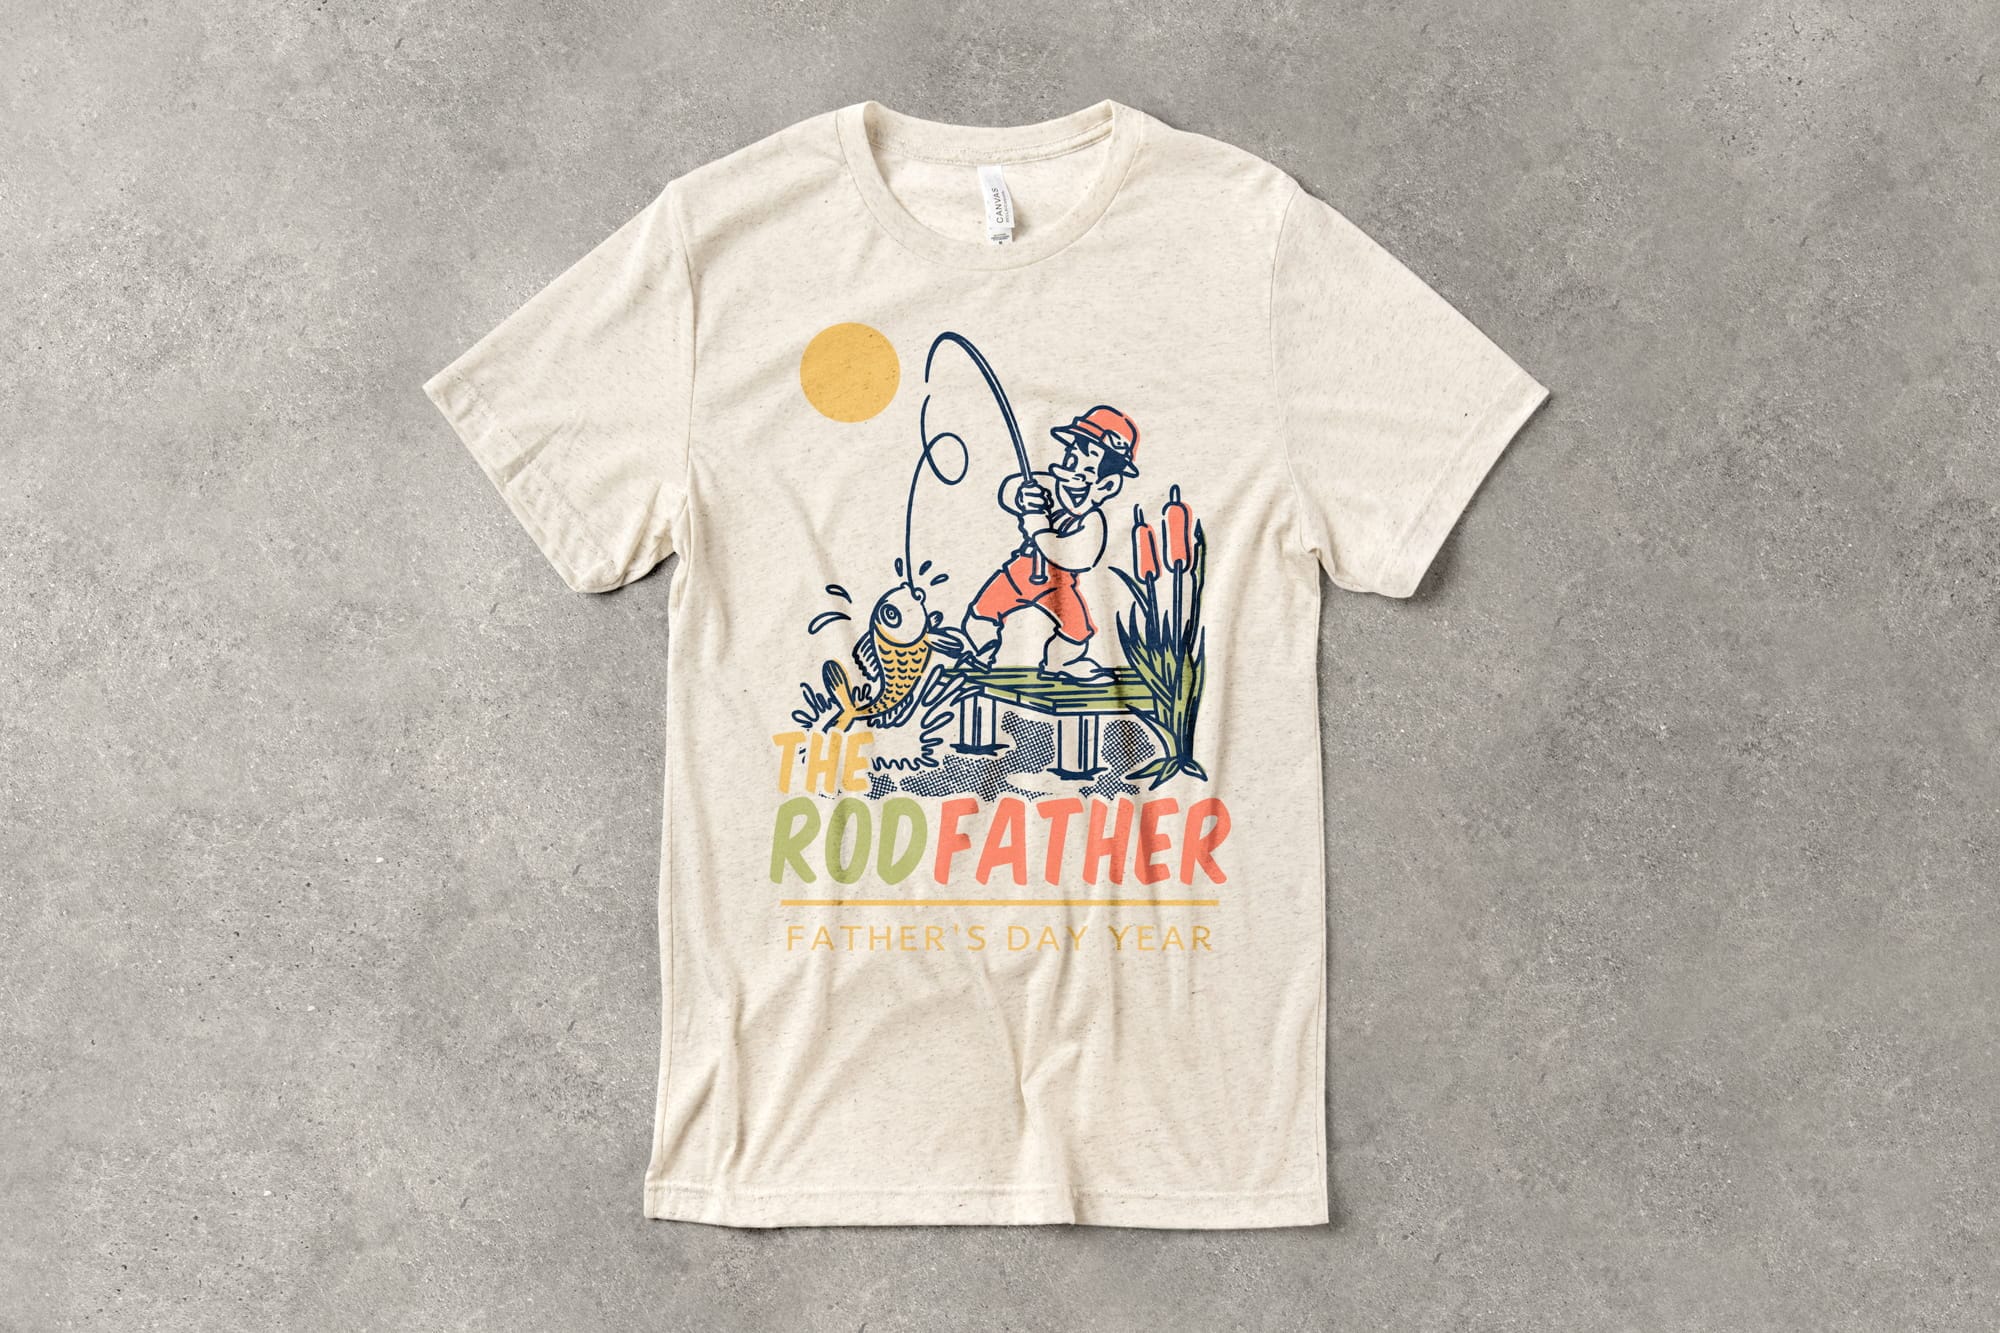 A flat t-shirt that has a customizable design that says "the rod father" and features a cartoon character catching a fish.